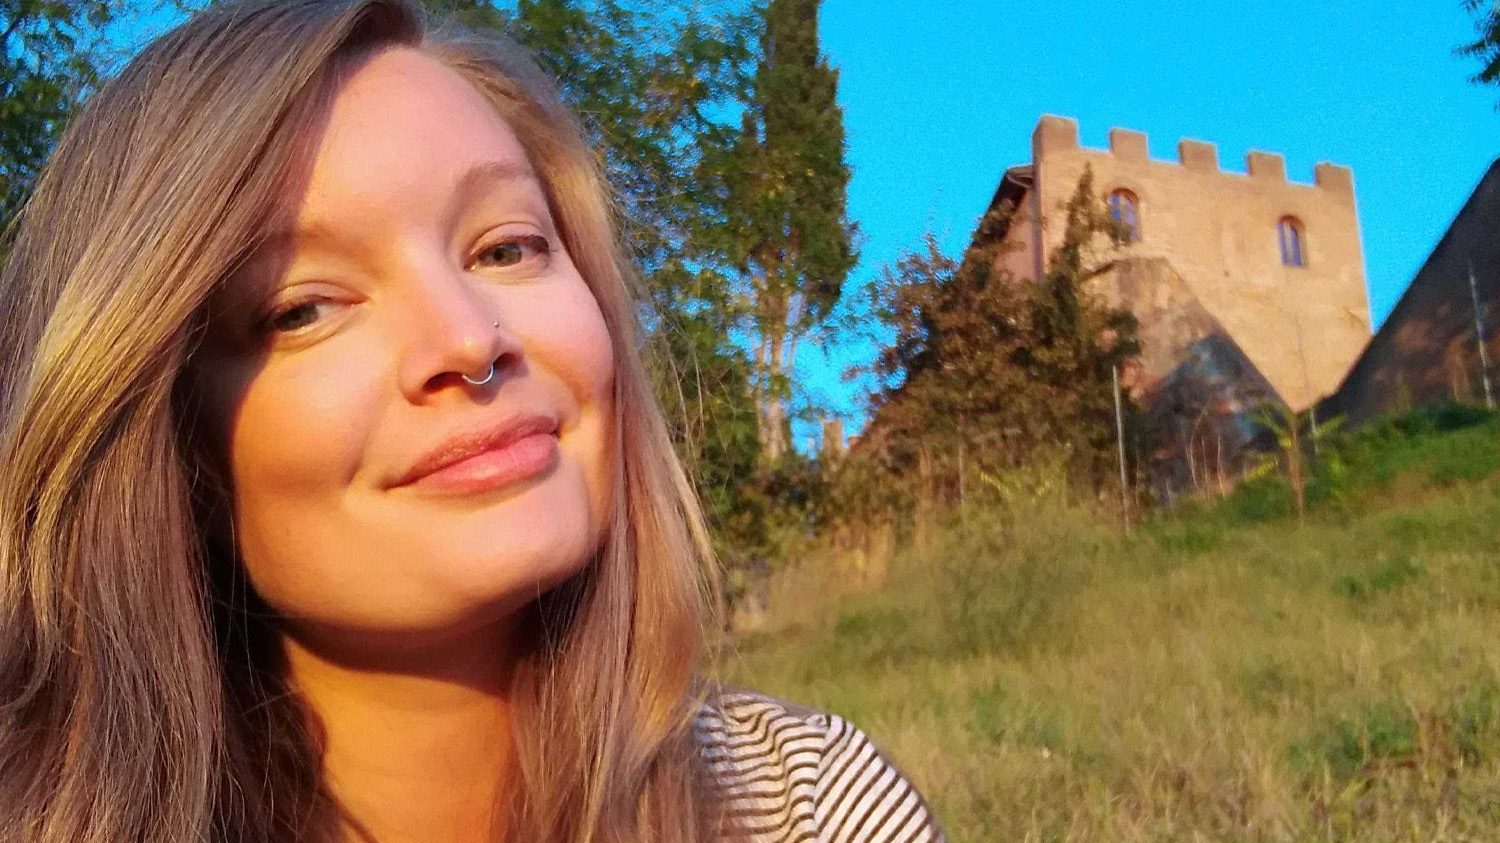 Headshot of Jo smiling at the camera with an old architectural structure in the background